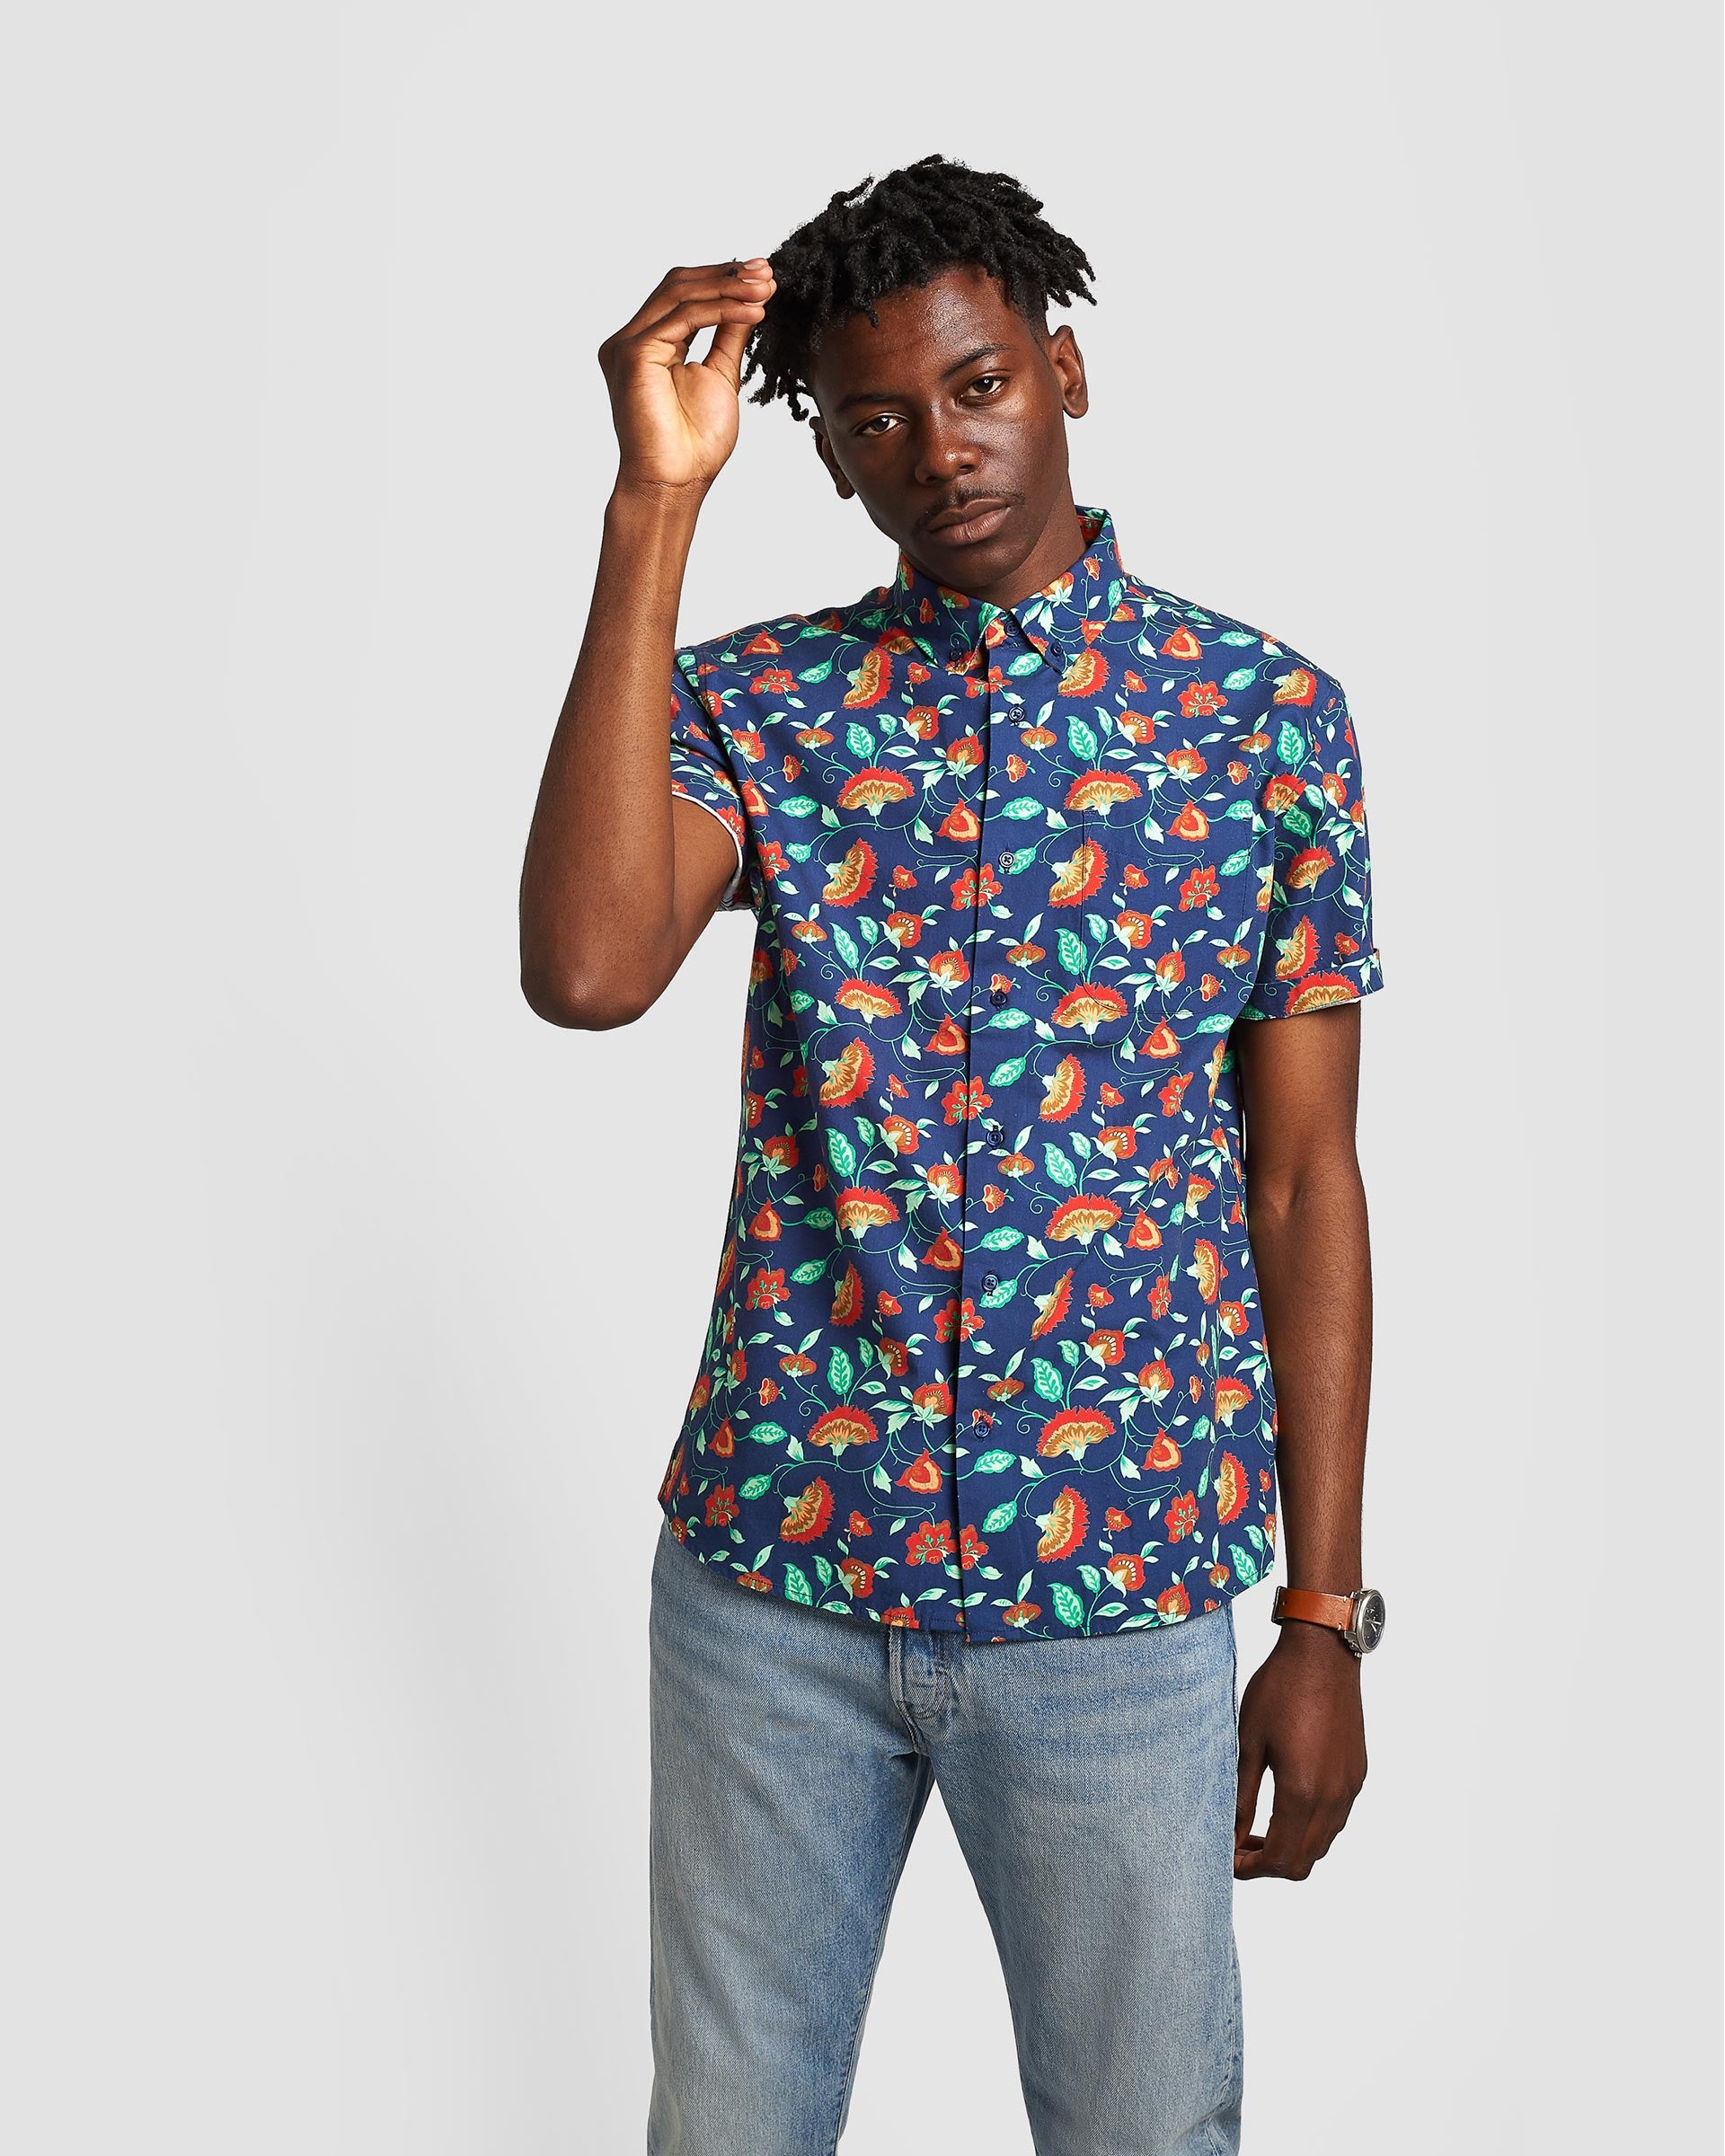 Dierentuin s nachts Staat Postcode Vintage Floral Print Shirt > Casual Shirt > Button Up Shirt – Poplin & Co  USA